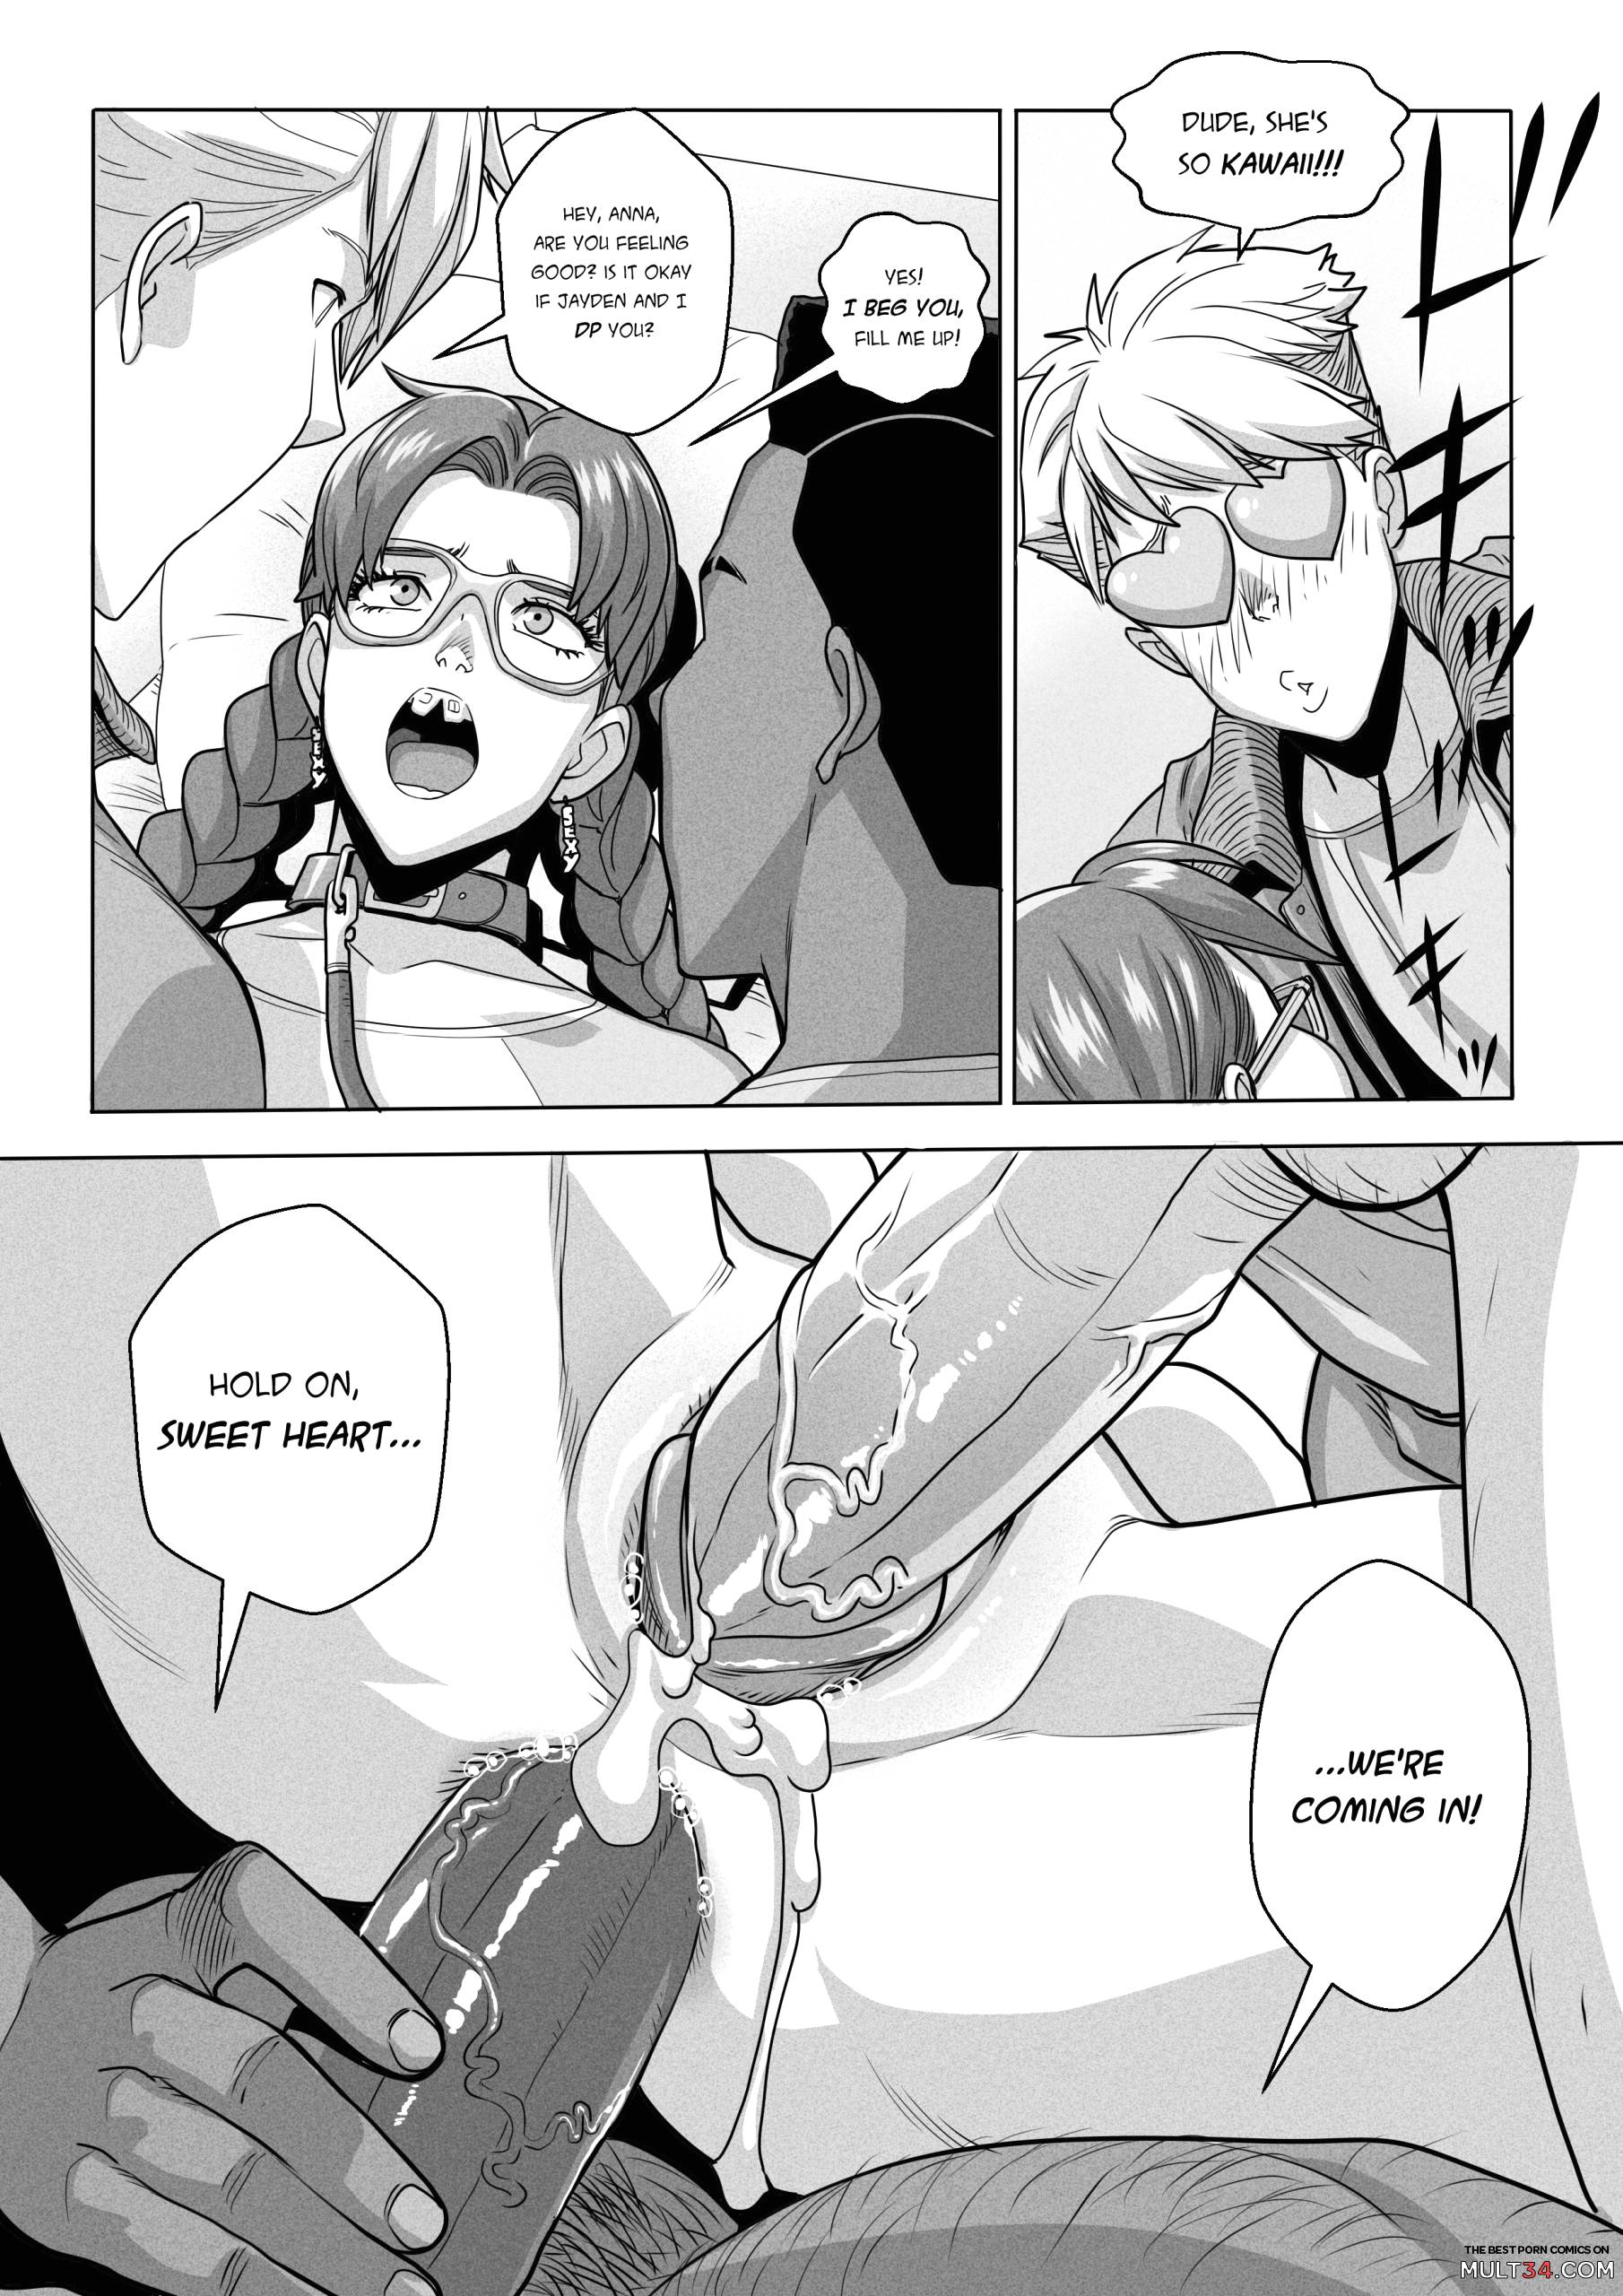 N.I.L.F. - Nerd I'd Like To Fuck page 27